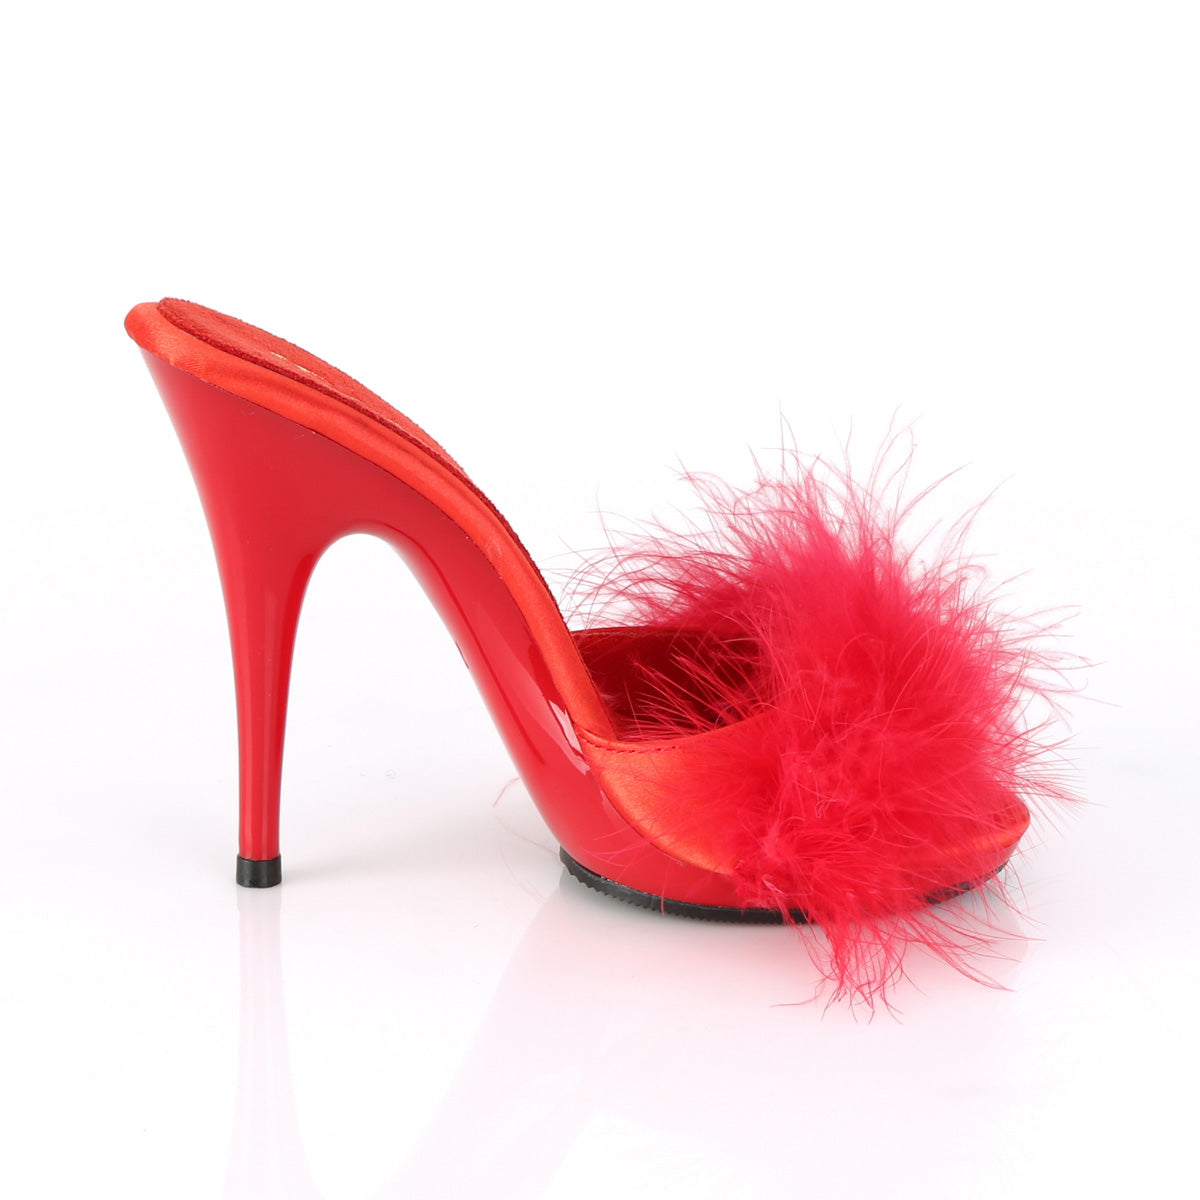 POISE-501F Red Satin-Marabou Fur/Red